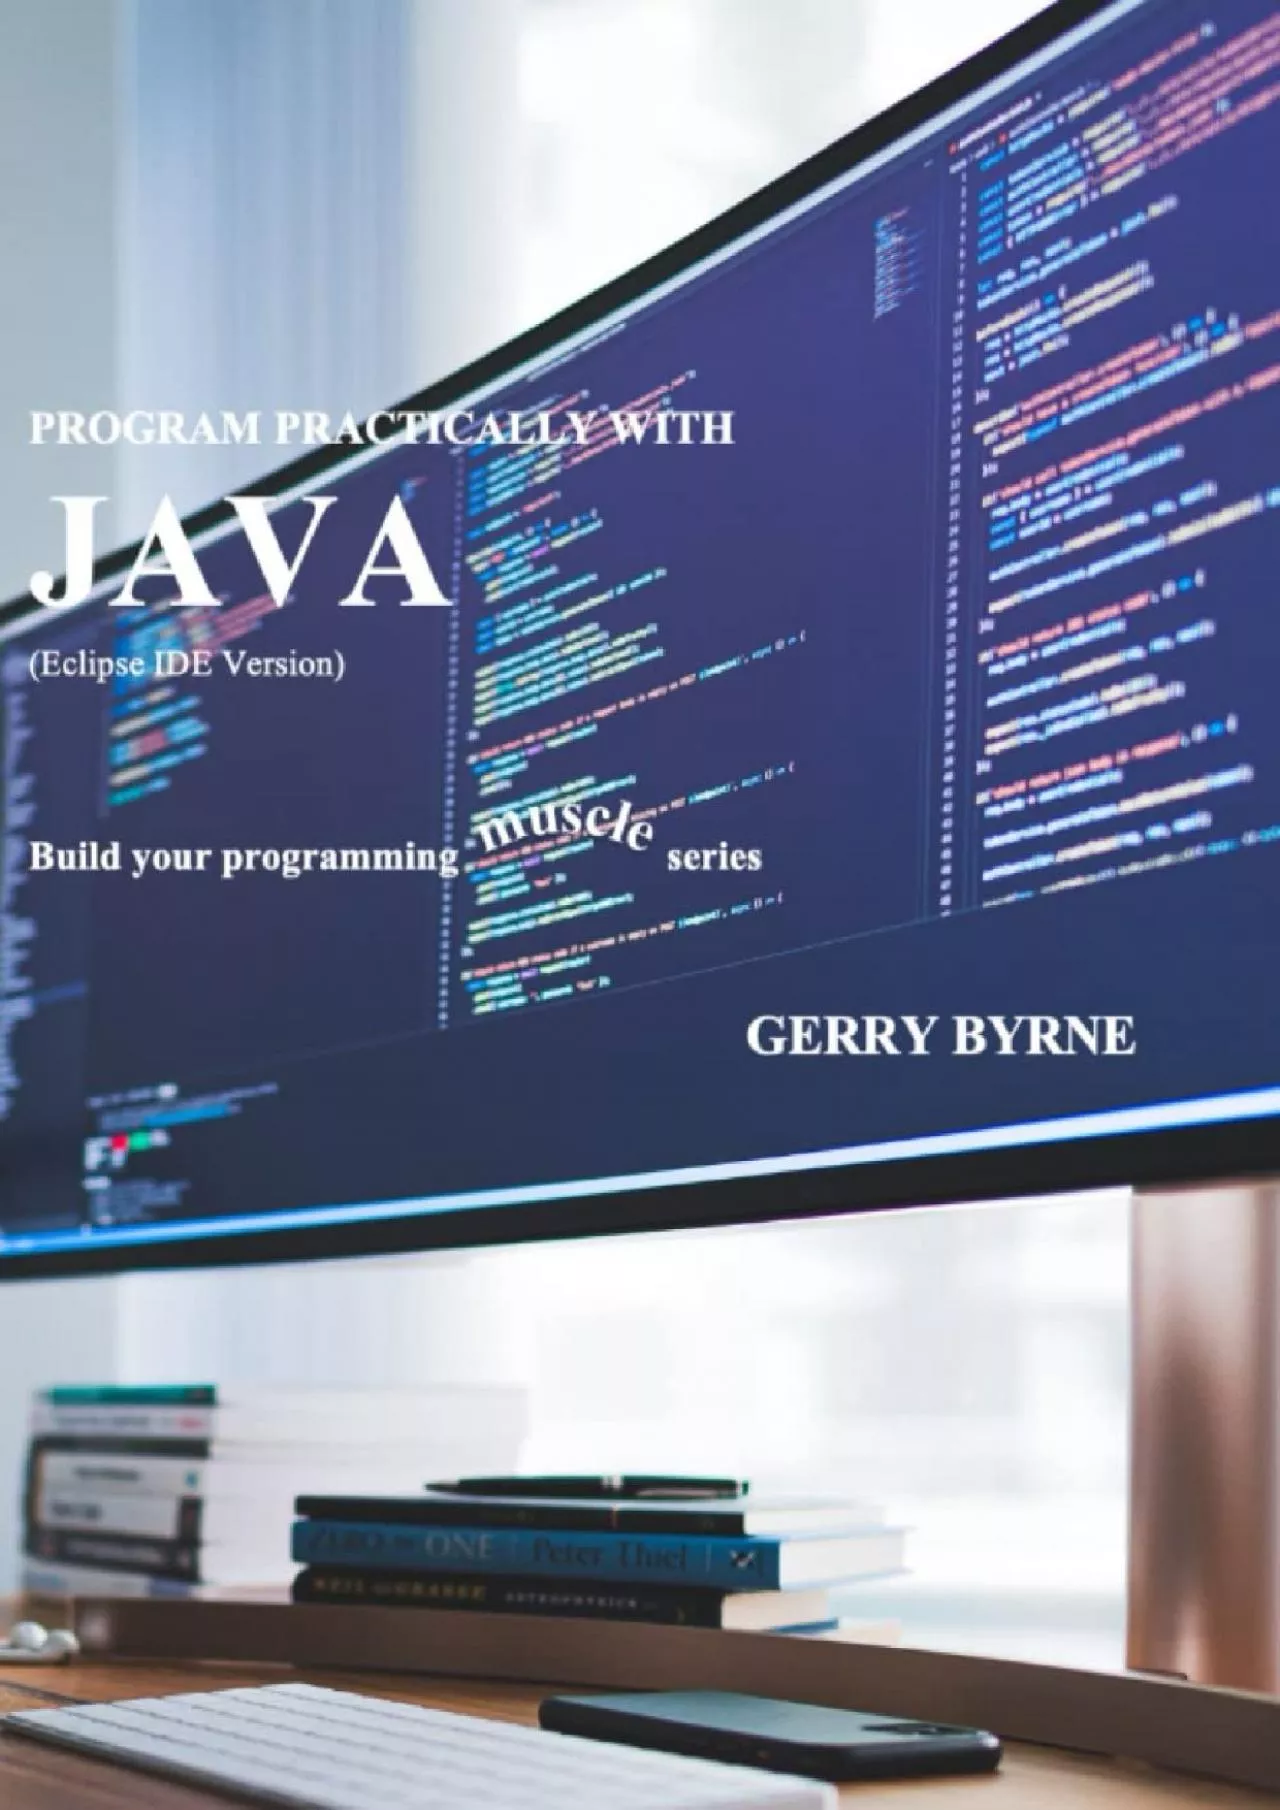 [PDF]-Program Practically With Java (Eclipse IDE Version) (Build your programming MUSCLE